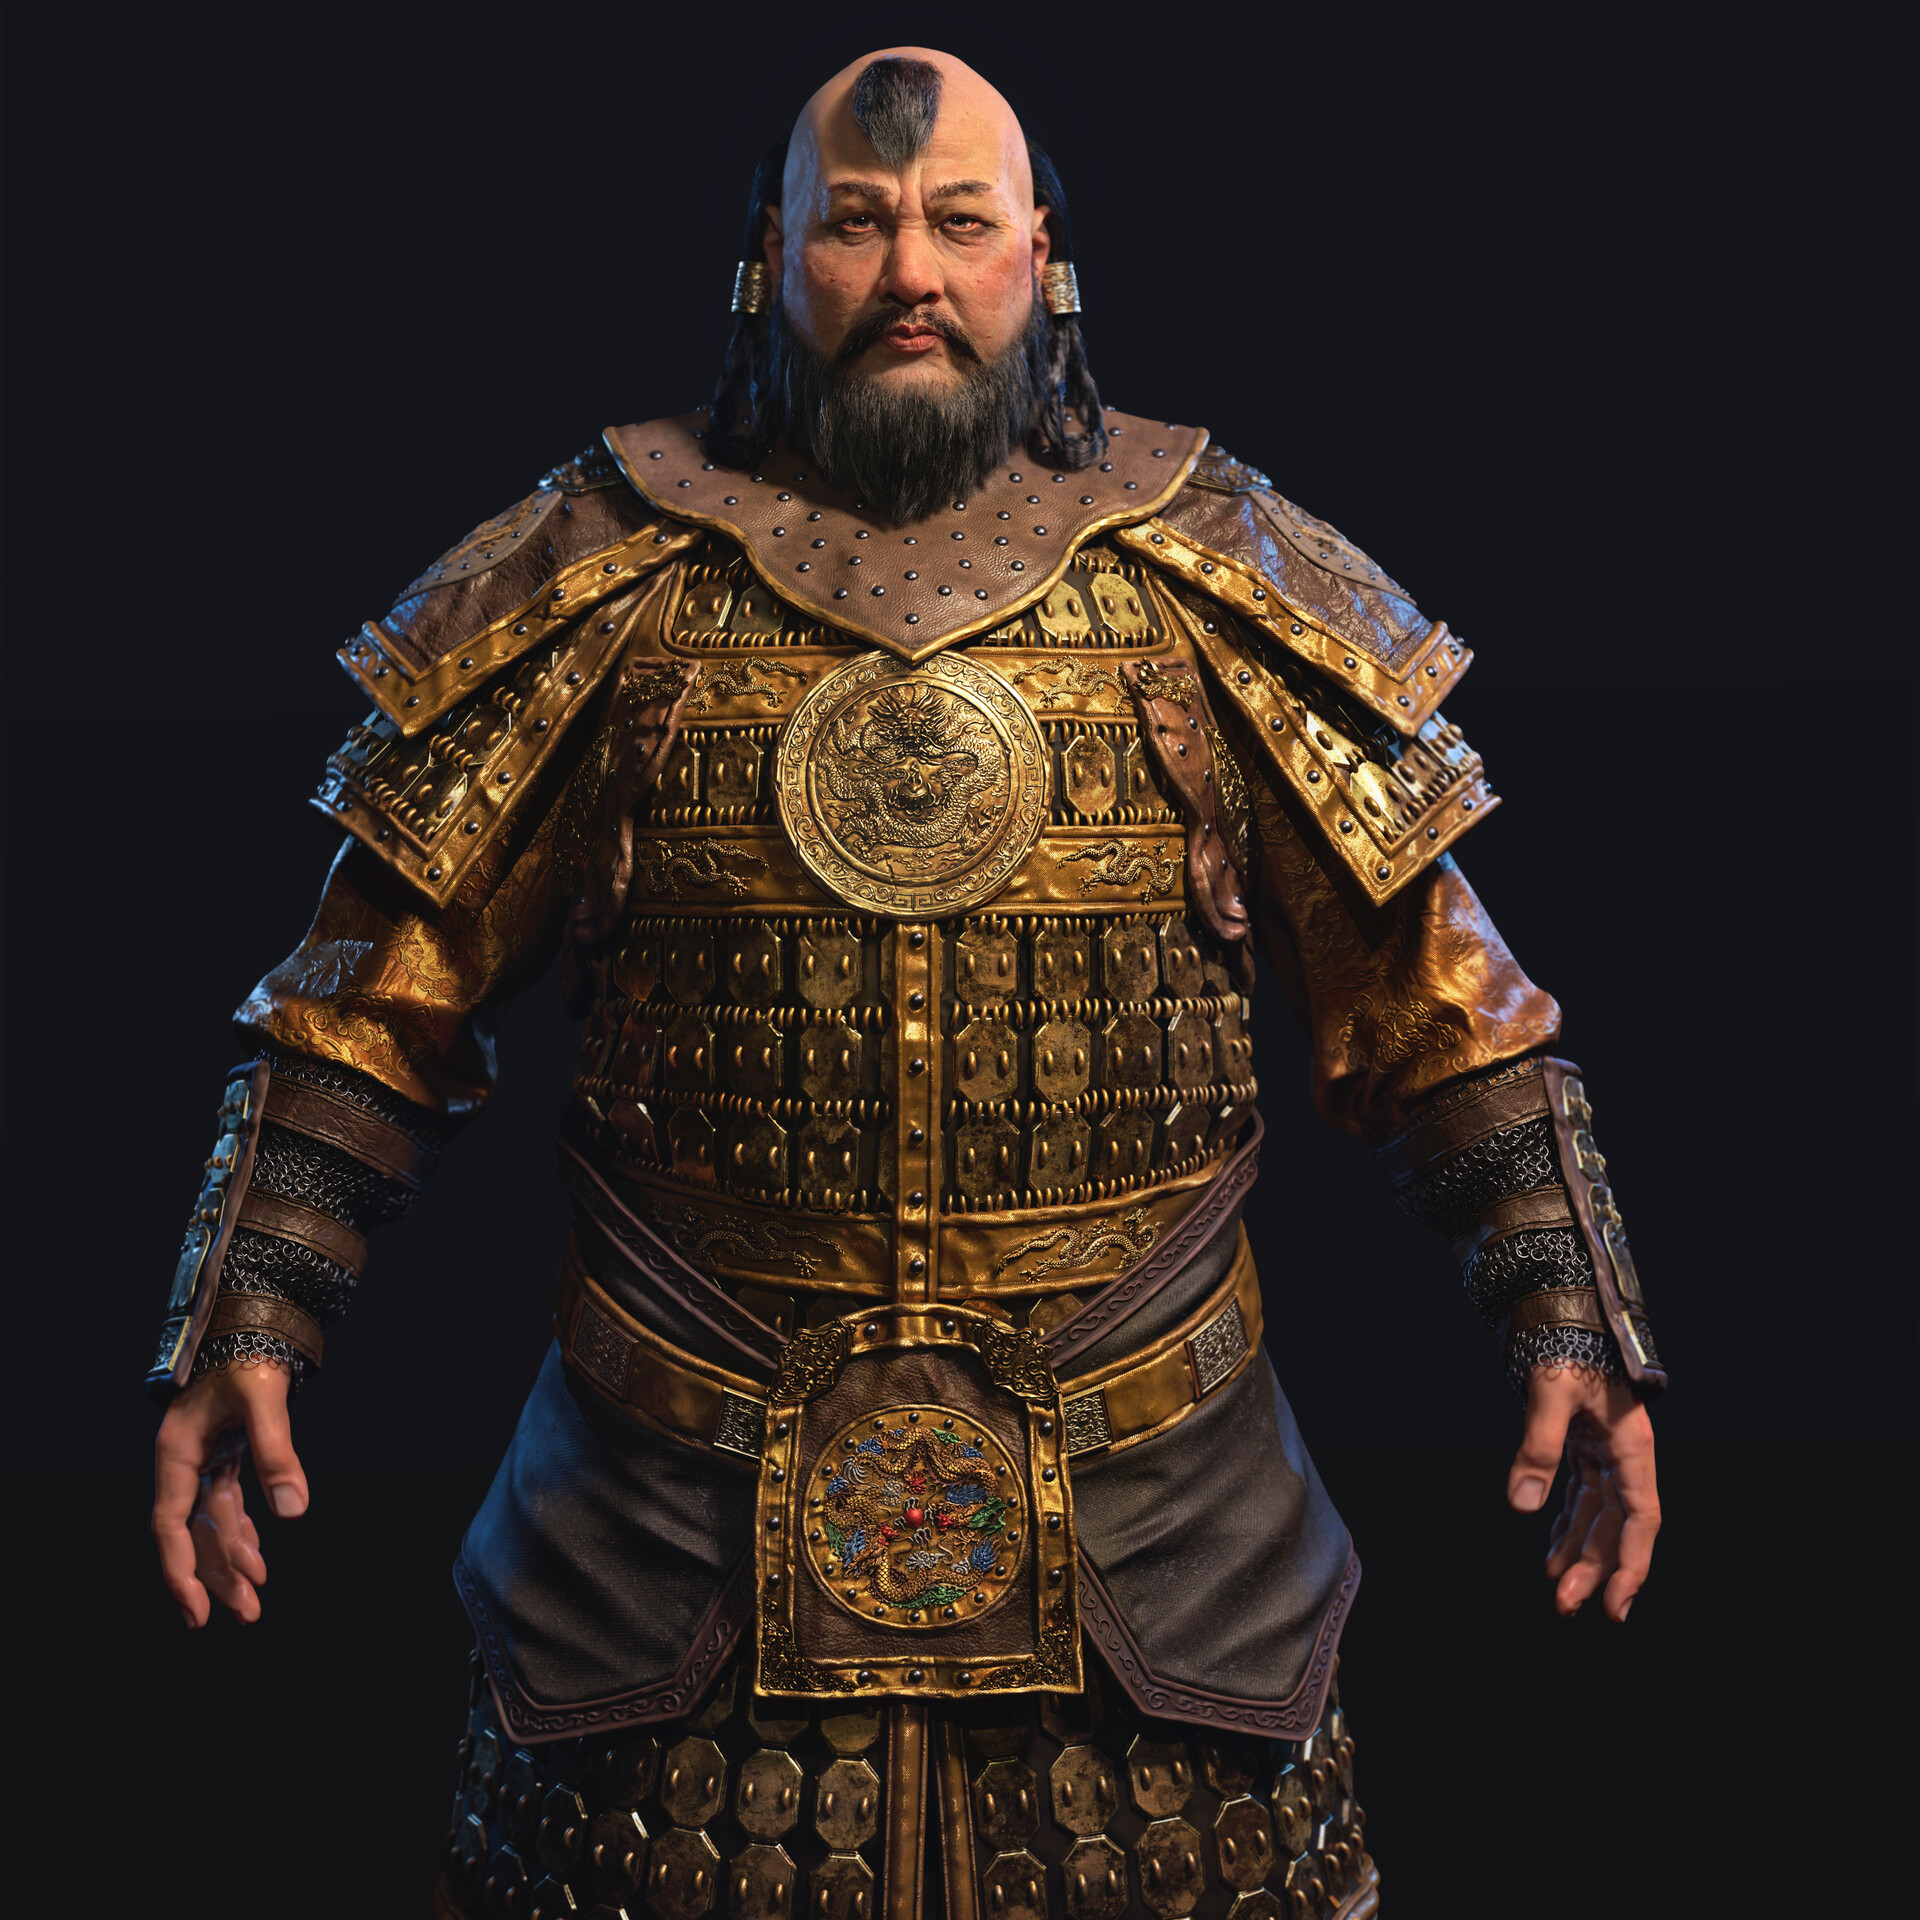 Kublai Khan from Marco Polo.